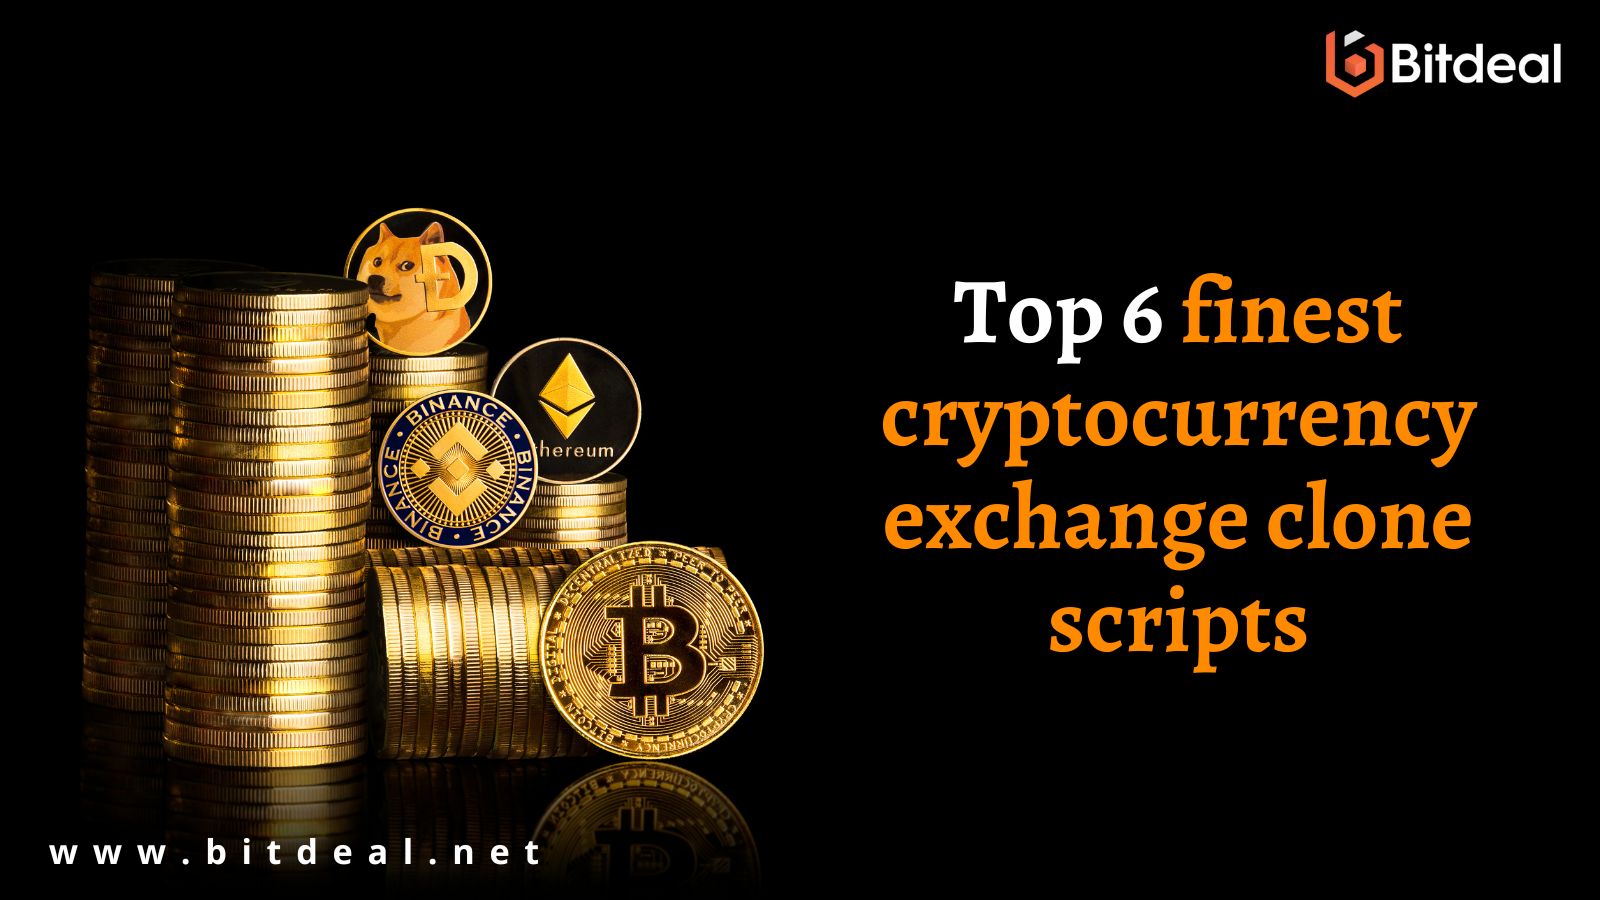 Top 6 finest cryptocurrency exchange clone scripts